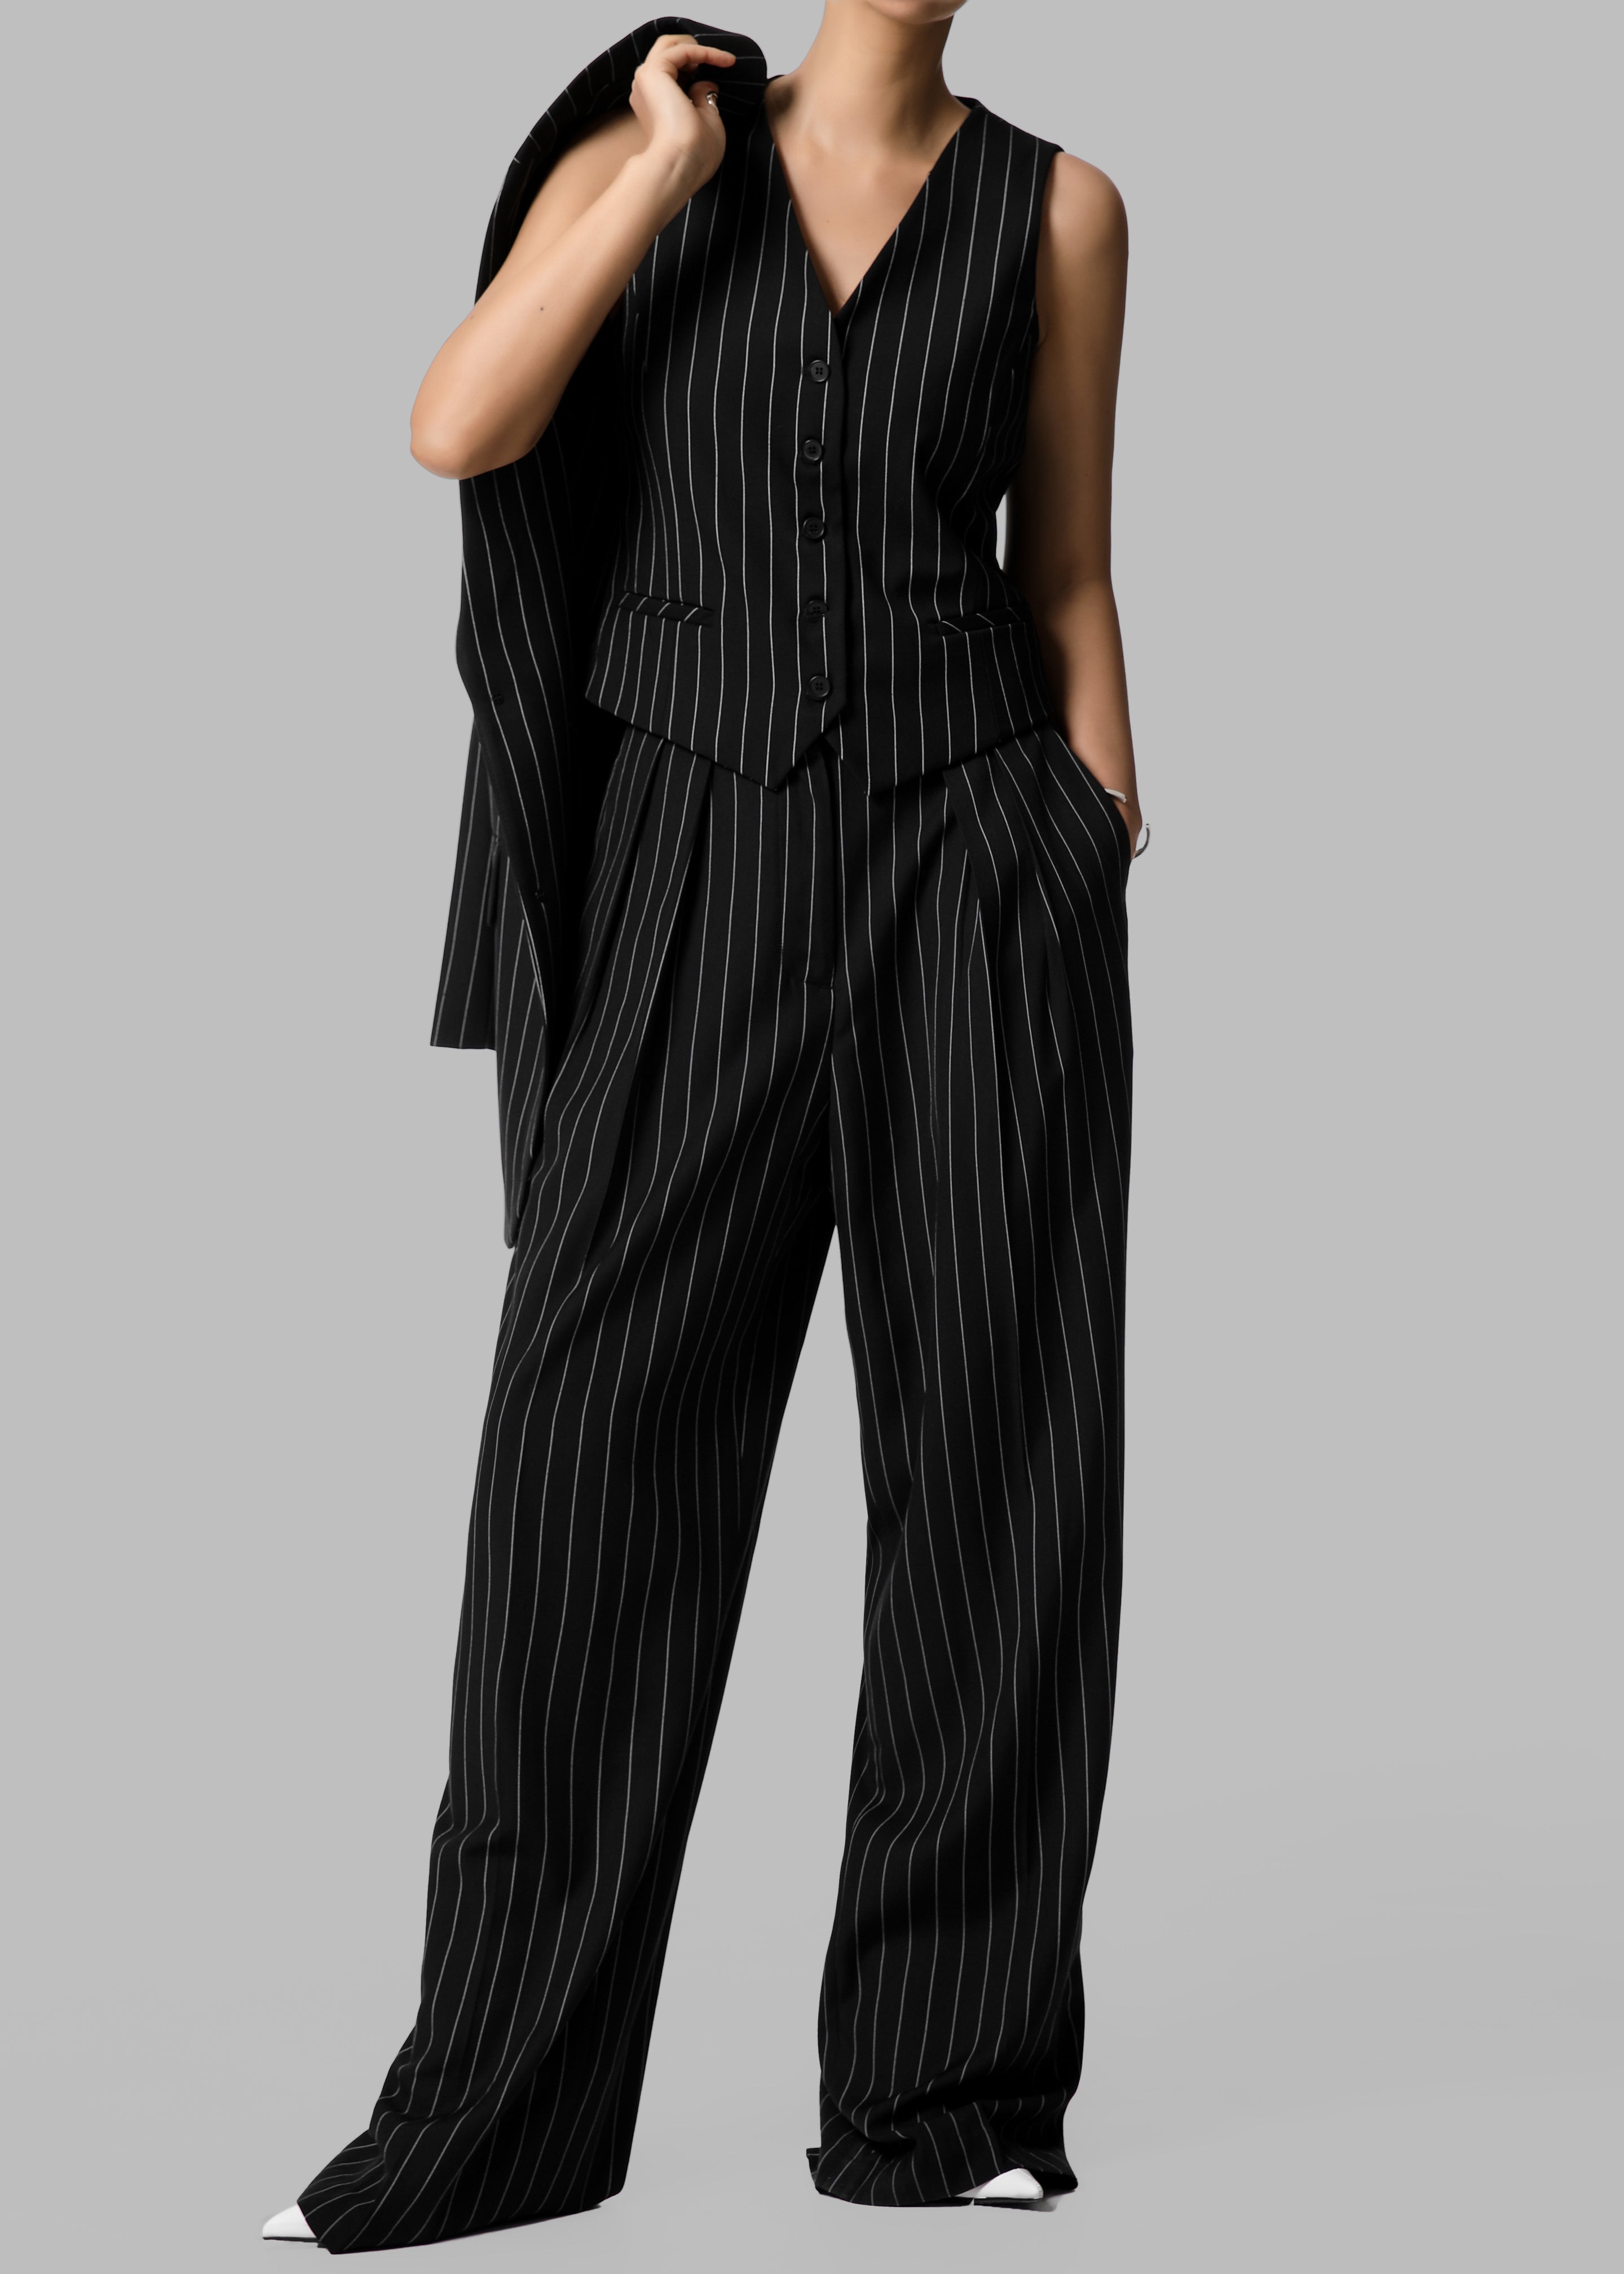 Holland Pleated Trousers - Black/White Pinstripe - 5